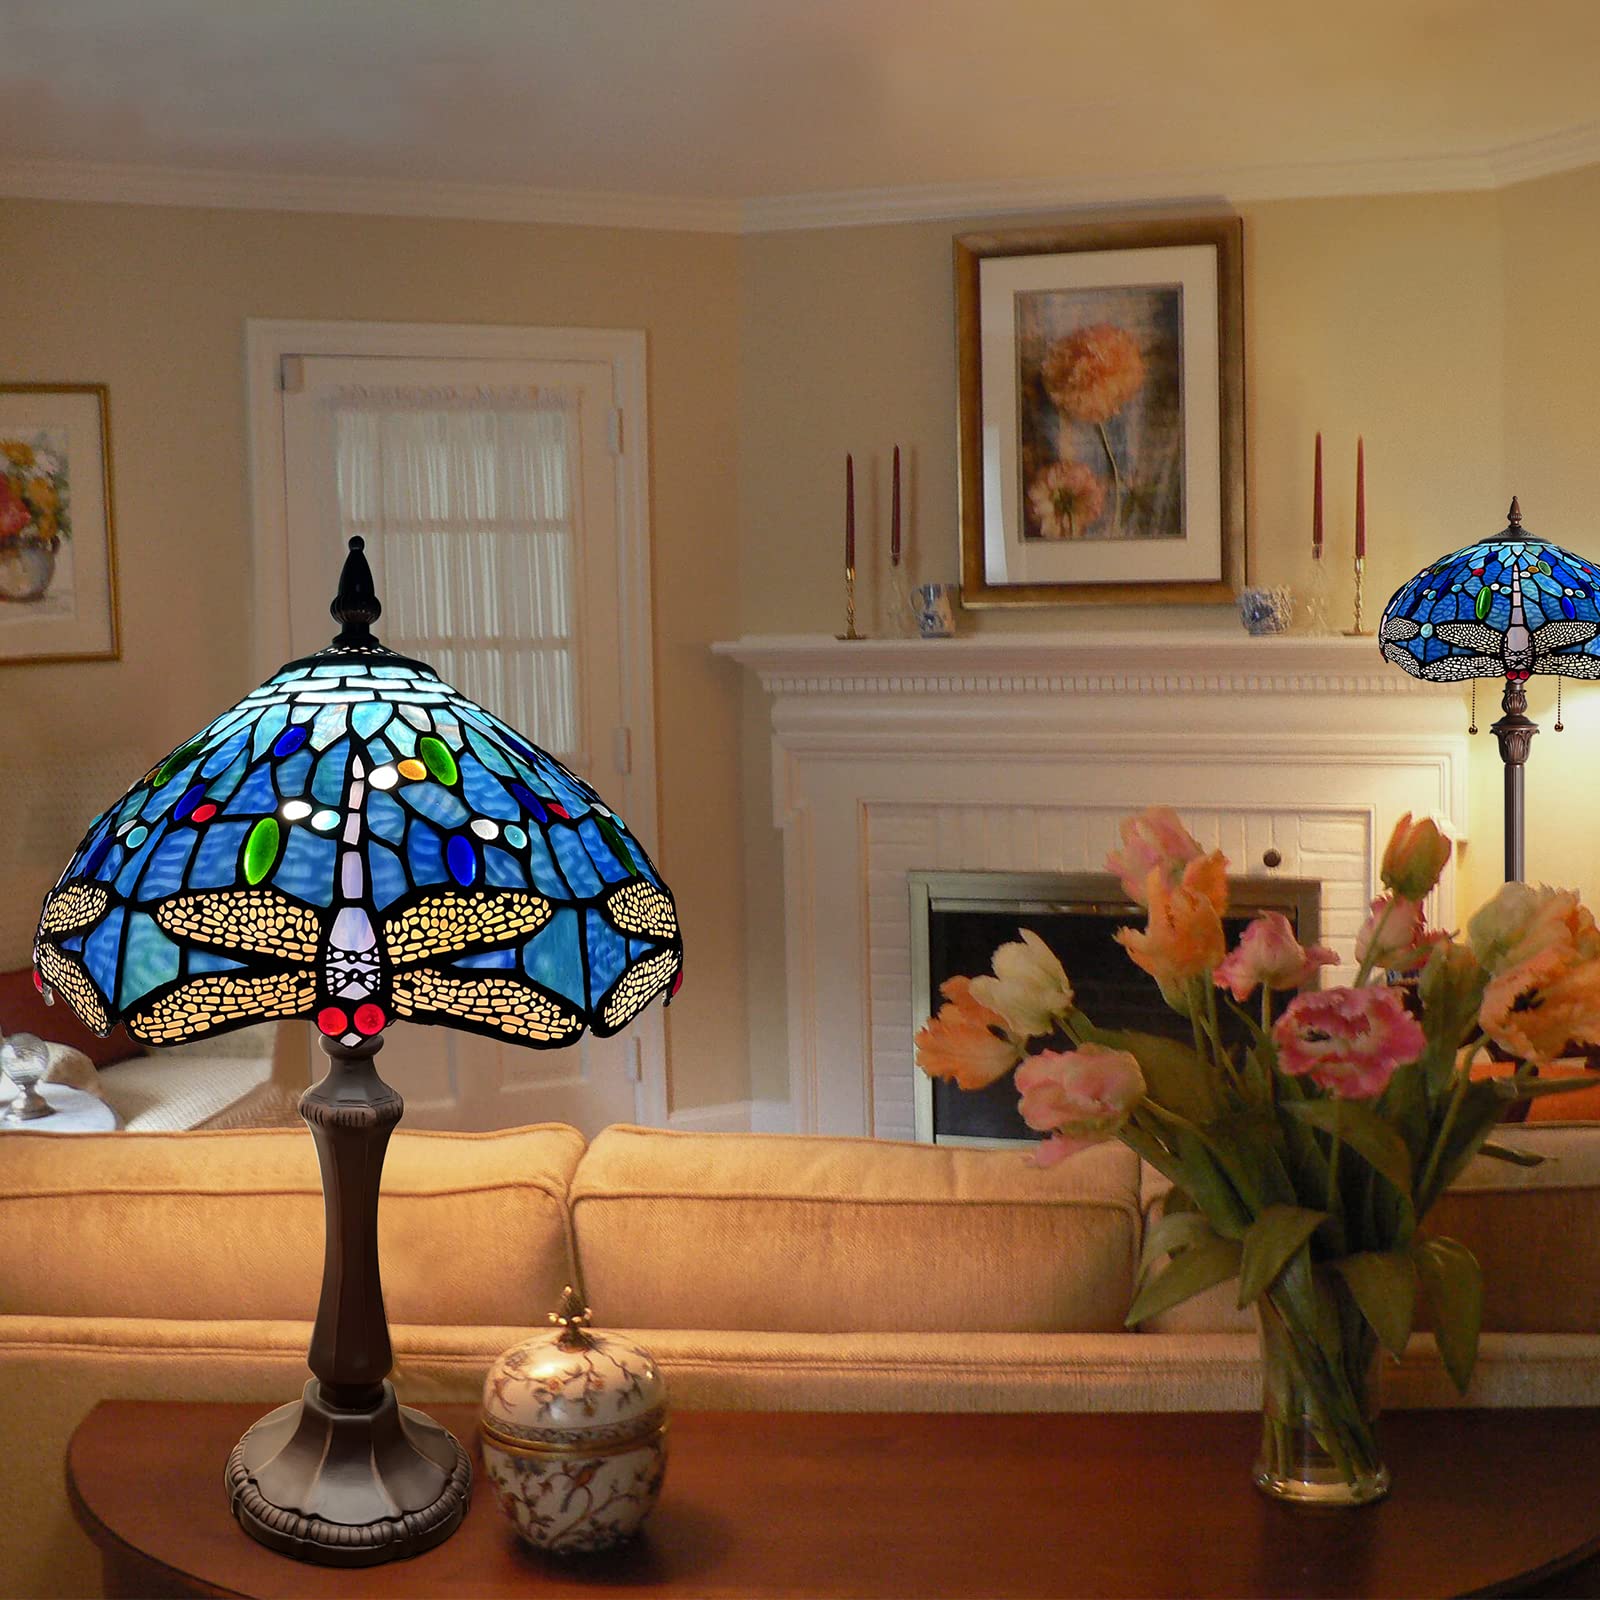 Vinplus Tiffany Lamp Table Lamp Blue Dragonfly Style Reading Desk Lamp 19" Tall - image 5 of 6